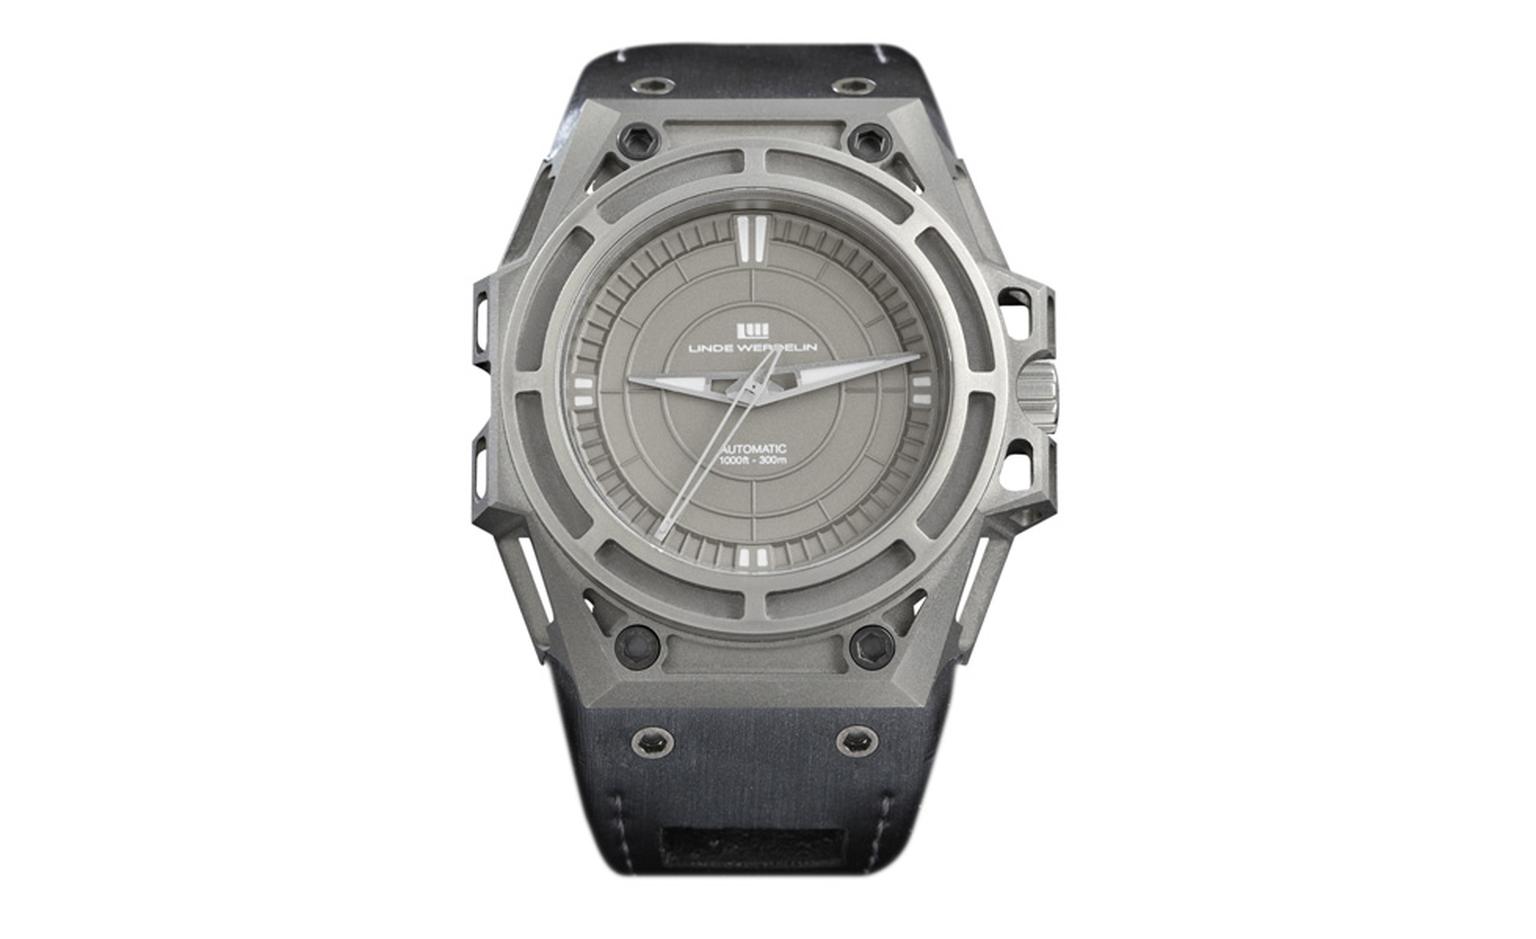 SpidoLite-titanium for 5,880 euros that is limited to 222 pieces